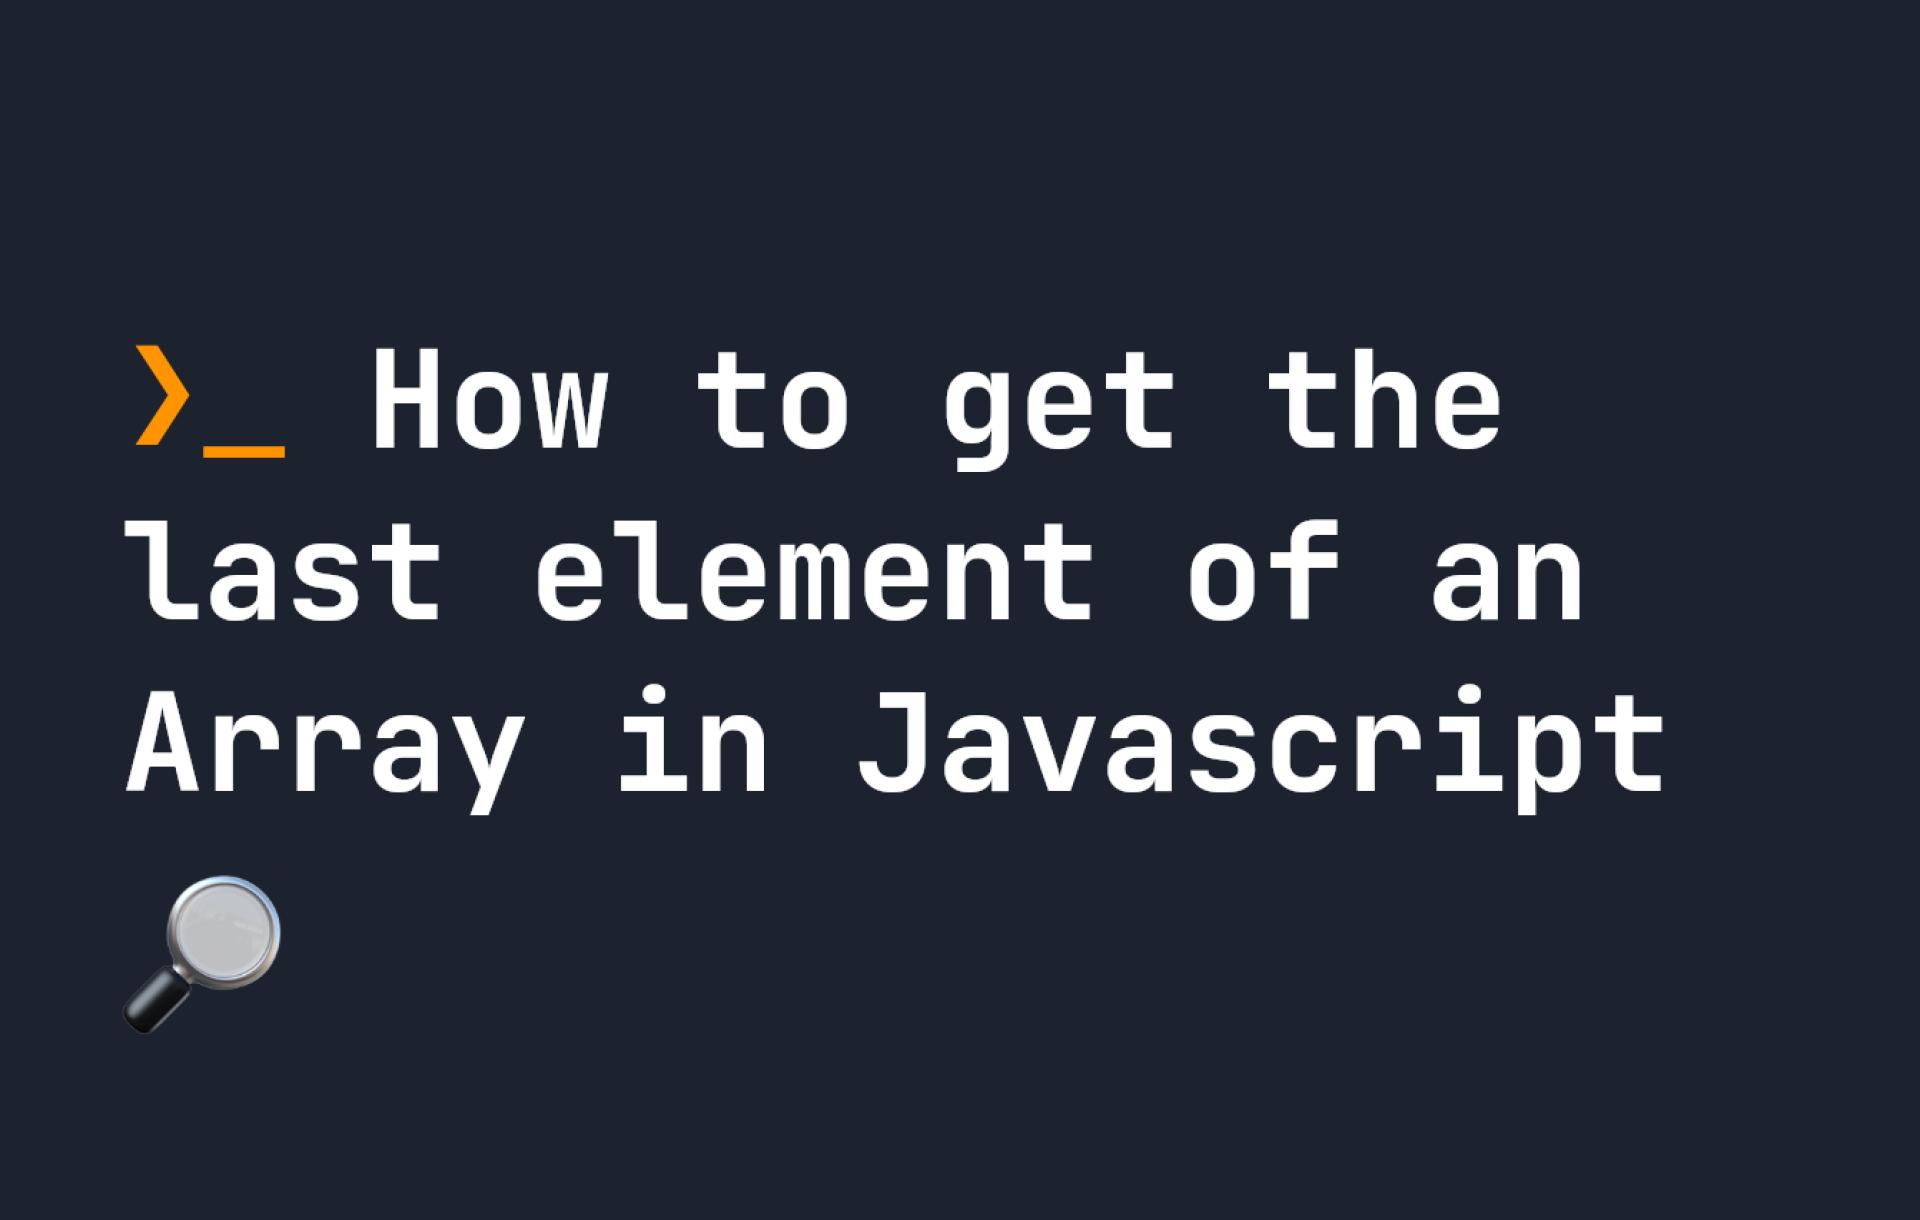 How to get the last element of an Array in Javascript